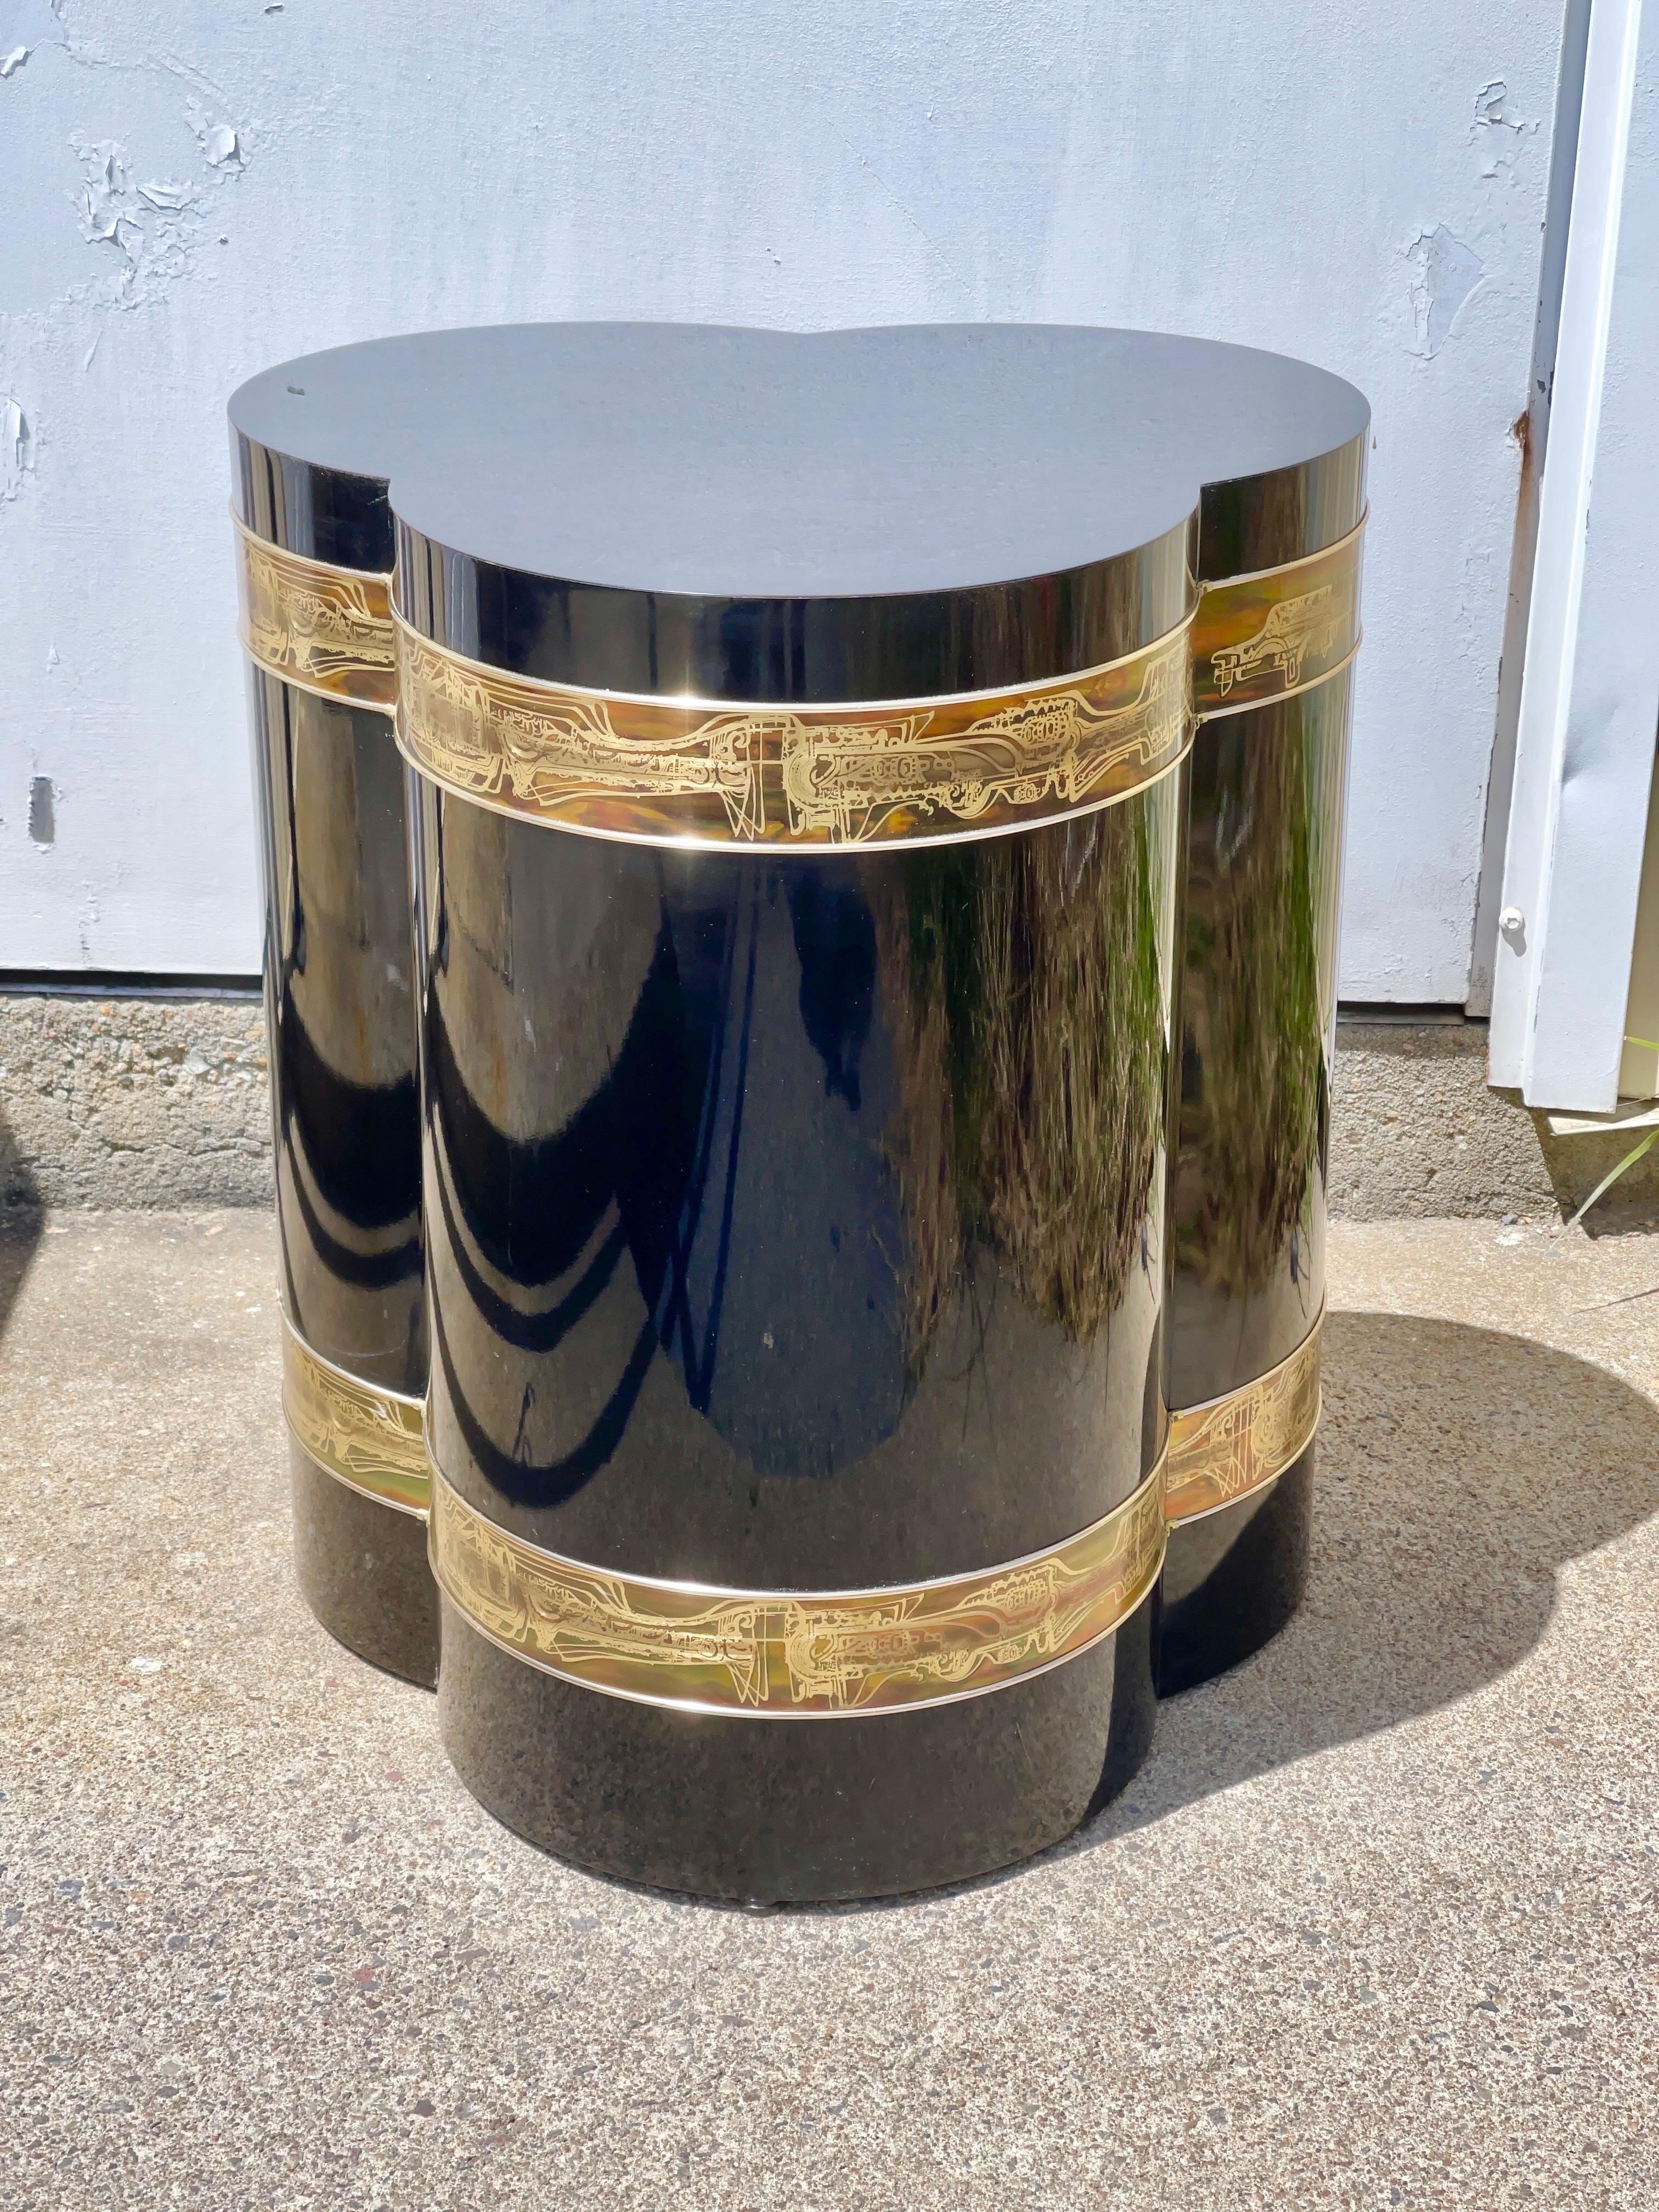 Mastercraft Trefoil Side Table with Bernhard Rohne Brass Banding In Good Condition For Sale In Hanover, MA